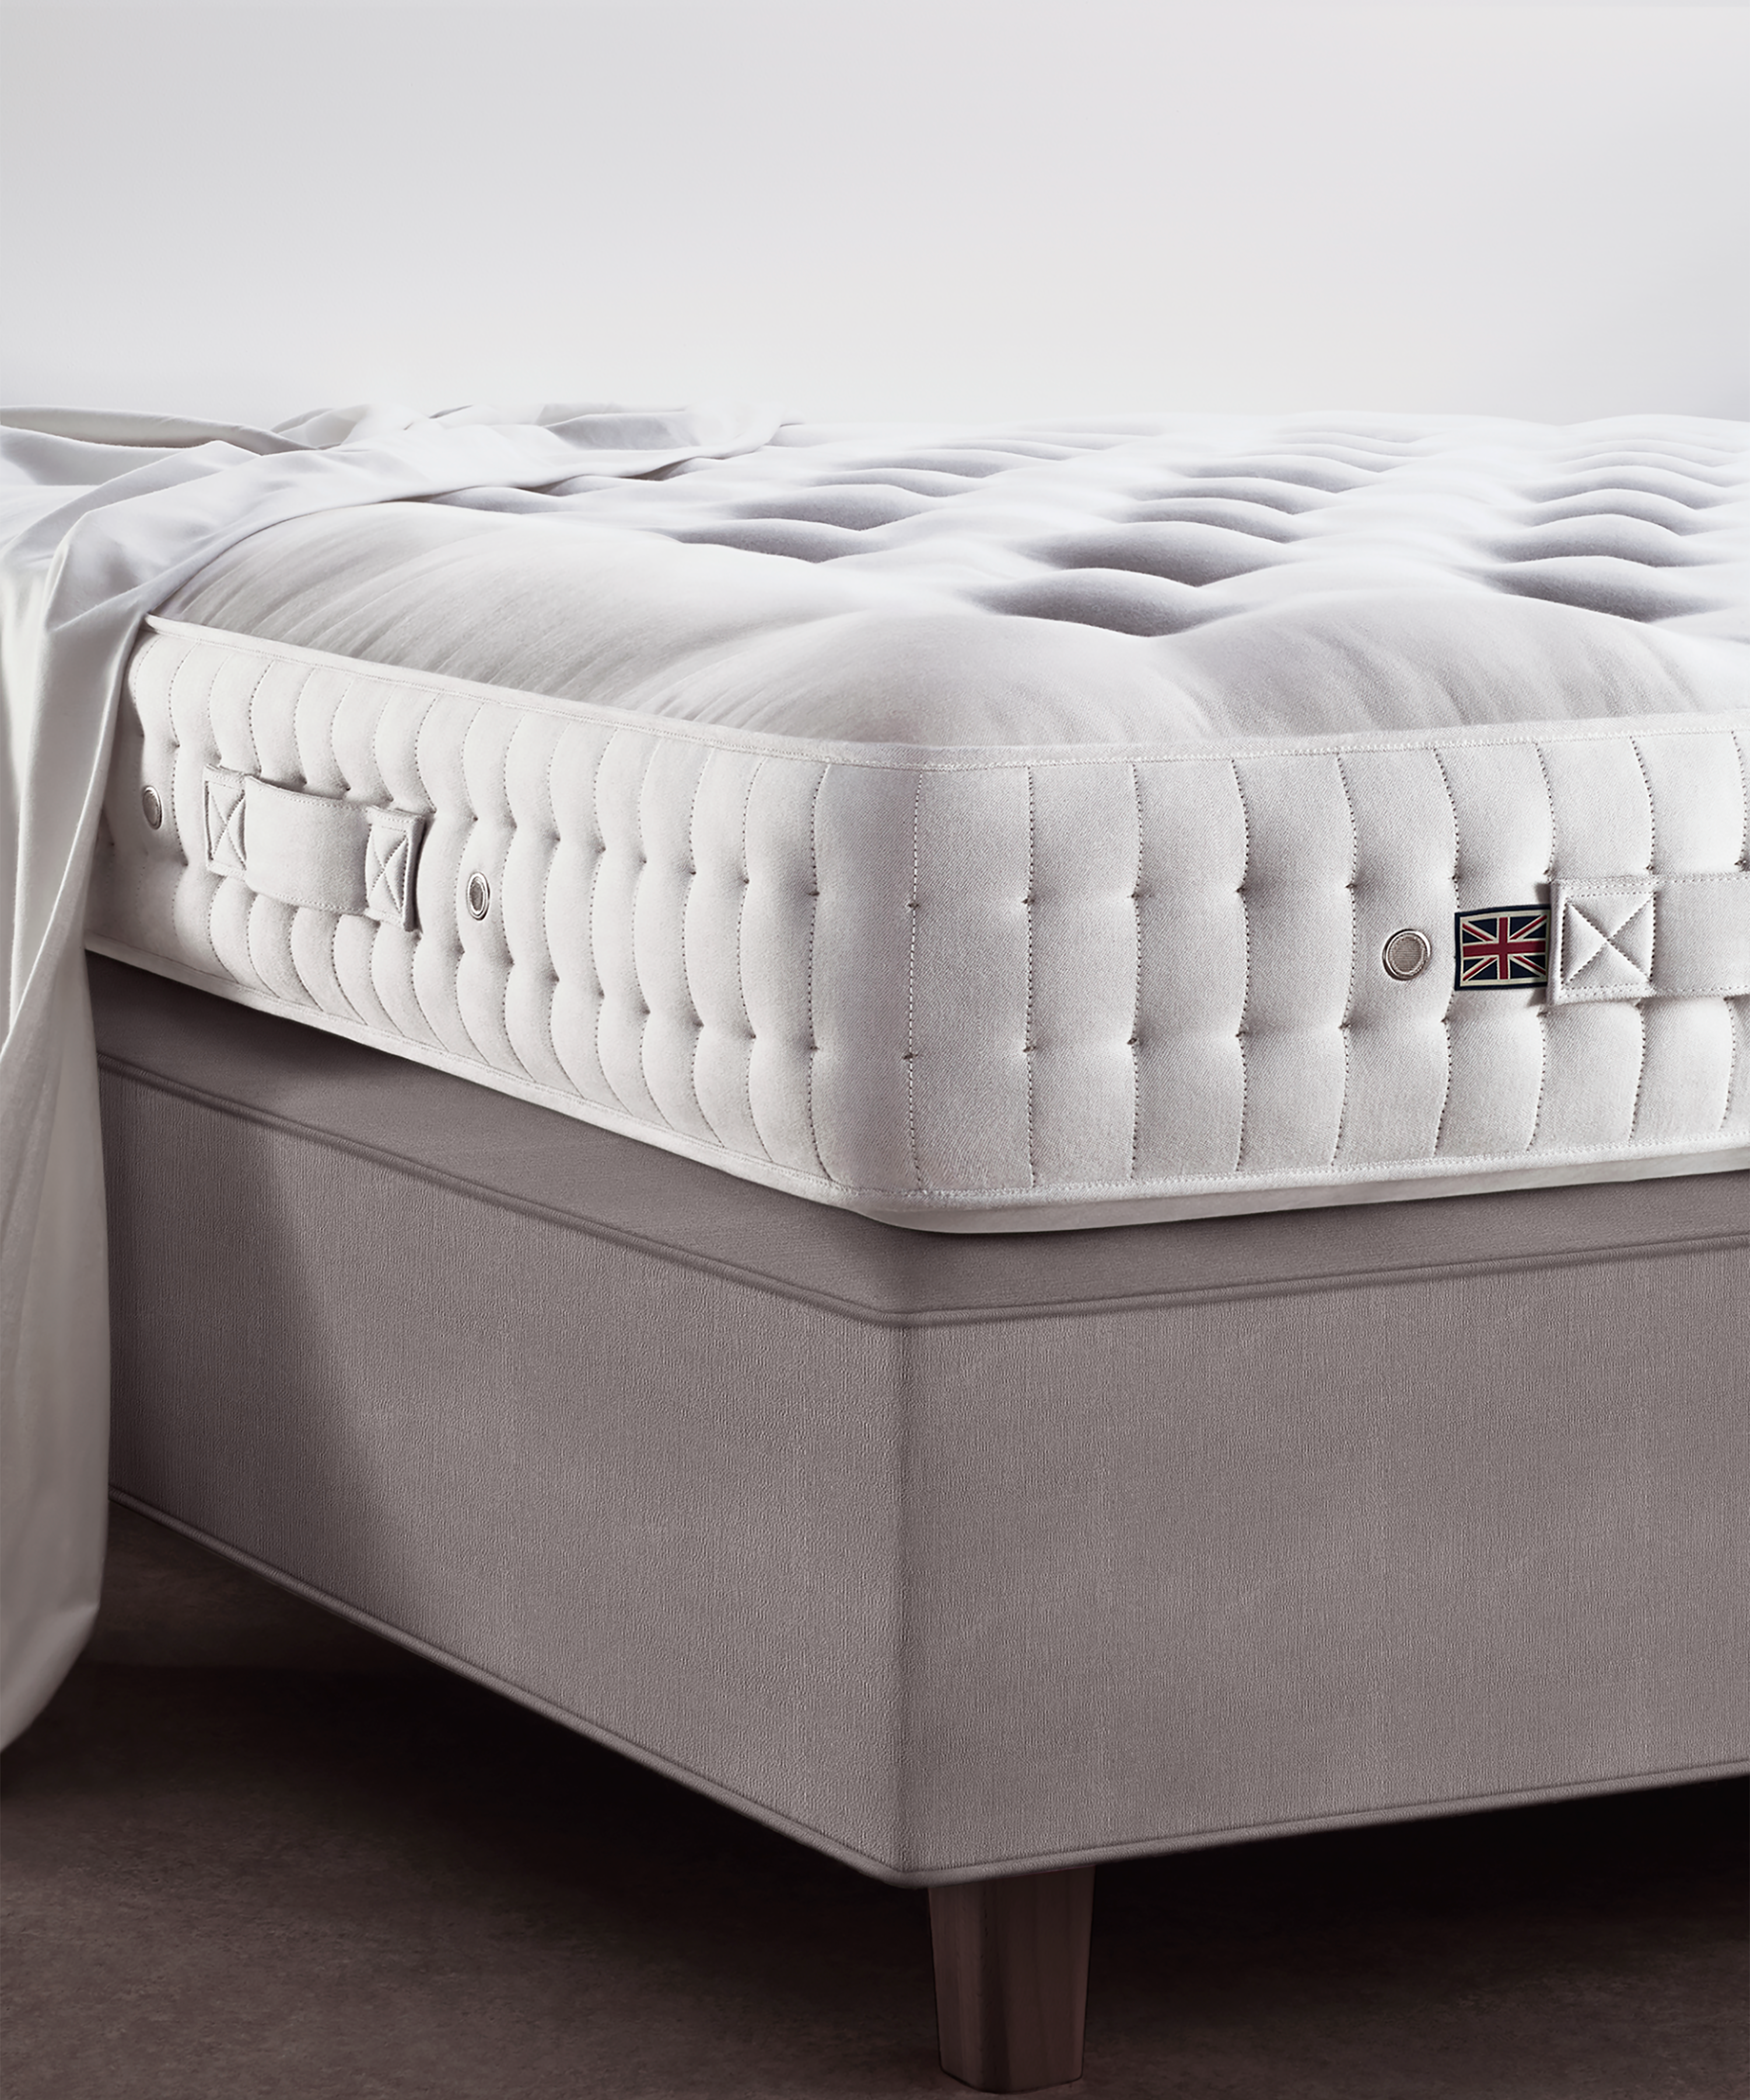 The Coronet's hand-teased British fleece wool and cotton in the topmost layer create a medium soft and resilient comfort layer that beautifully compliments the high coil count single-layer configuration of the exceptionally comfortable and wonderful mattress (2,058 coils / king).